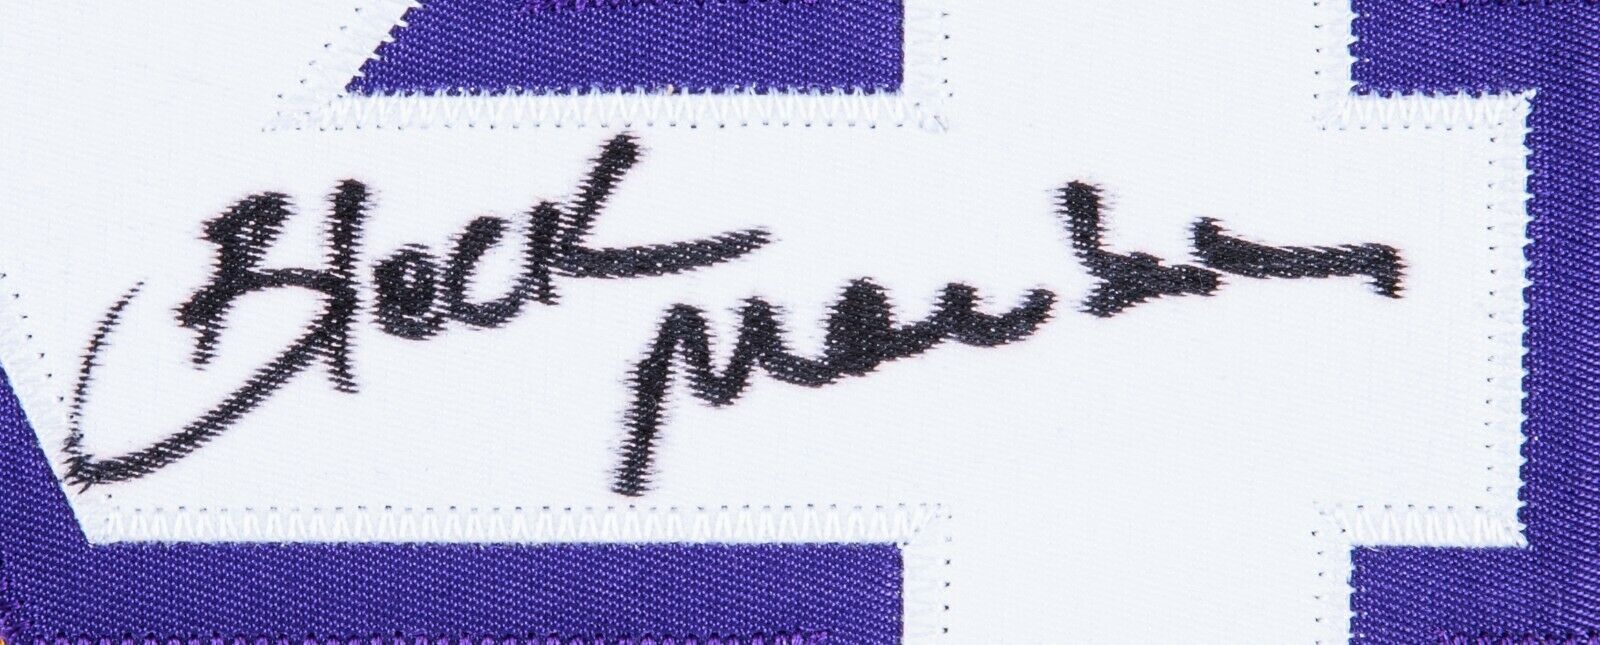 Kobe Bryant Signed Lakers Purple Jersey Inscribed Mamba Out #D/124 COA  Autograph - Inscriptagraphs Memorabilia - Inscriptagraphs Memorabilia